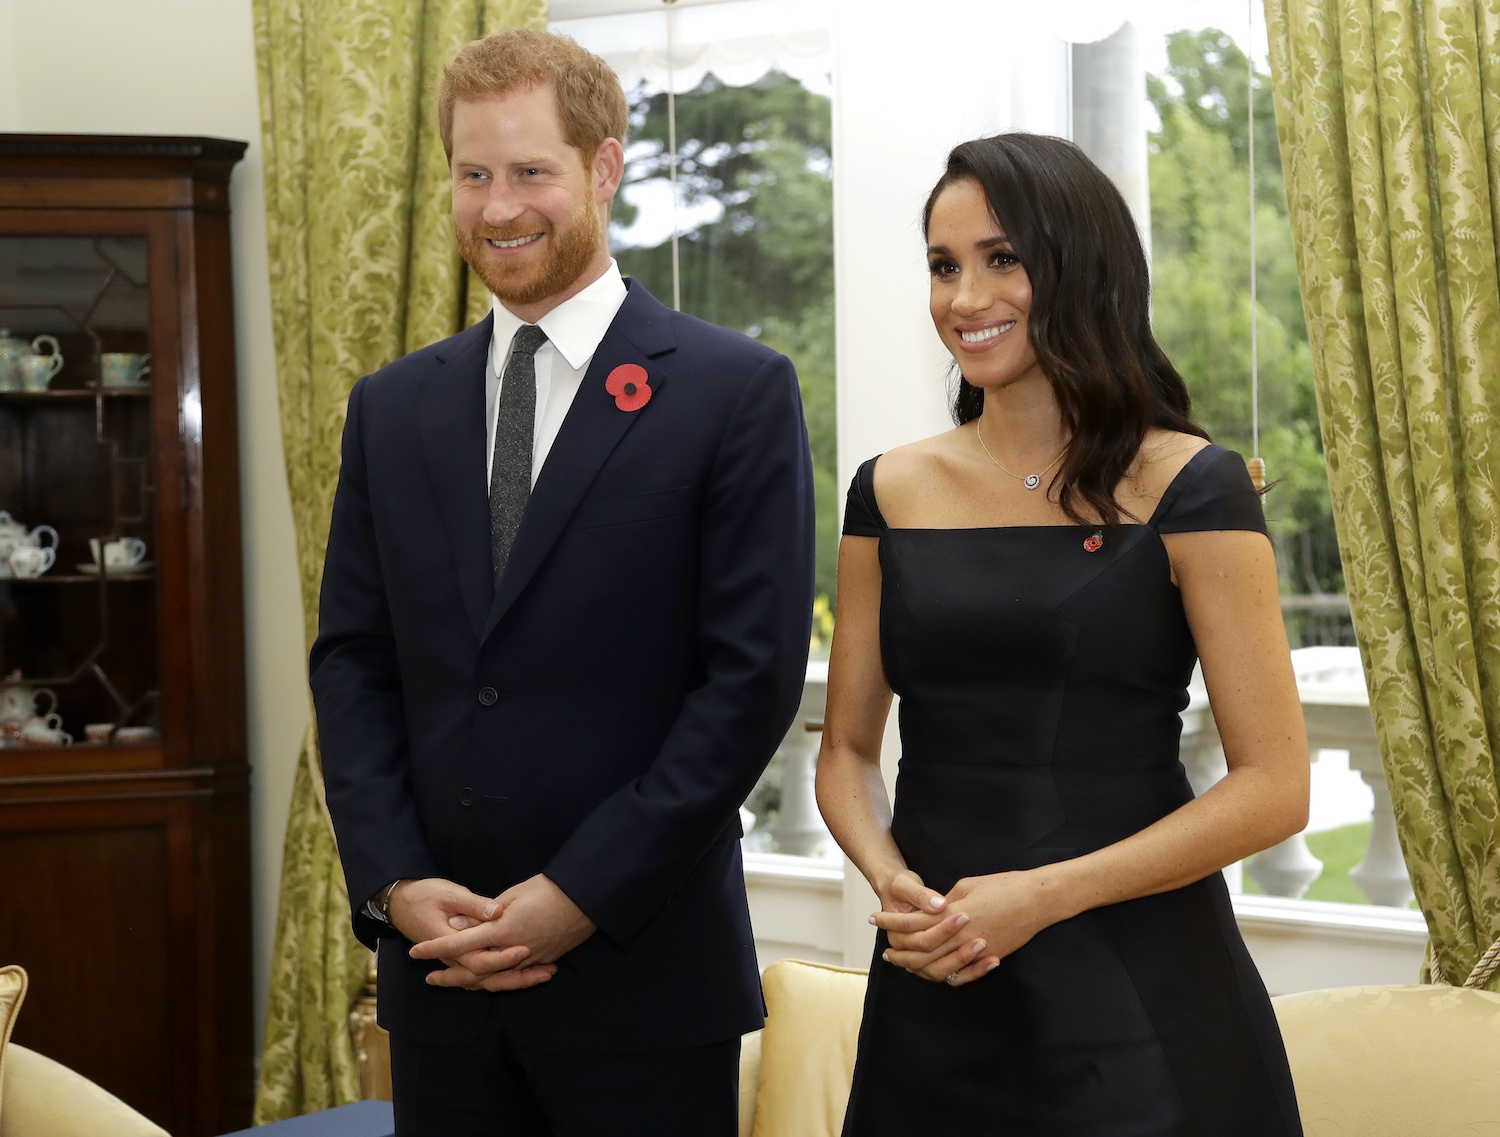 Prince Harry and Meghan Markle meet New Zealand Prime Minister Jacinda Ardern, at Government House on October 28, 2018